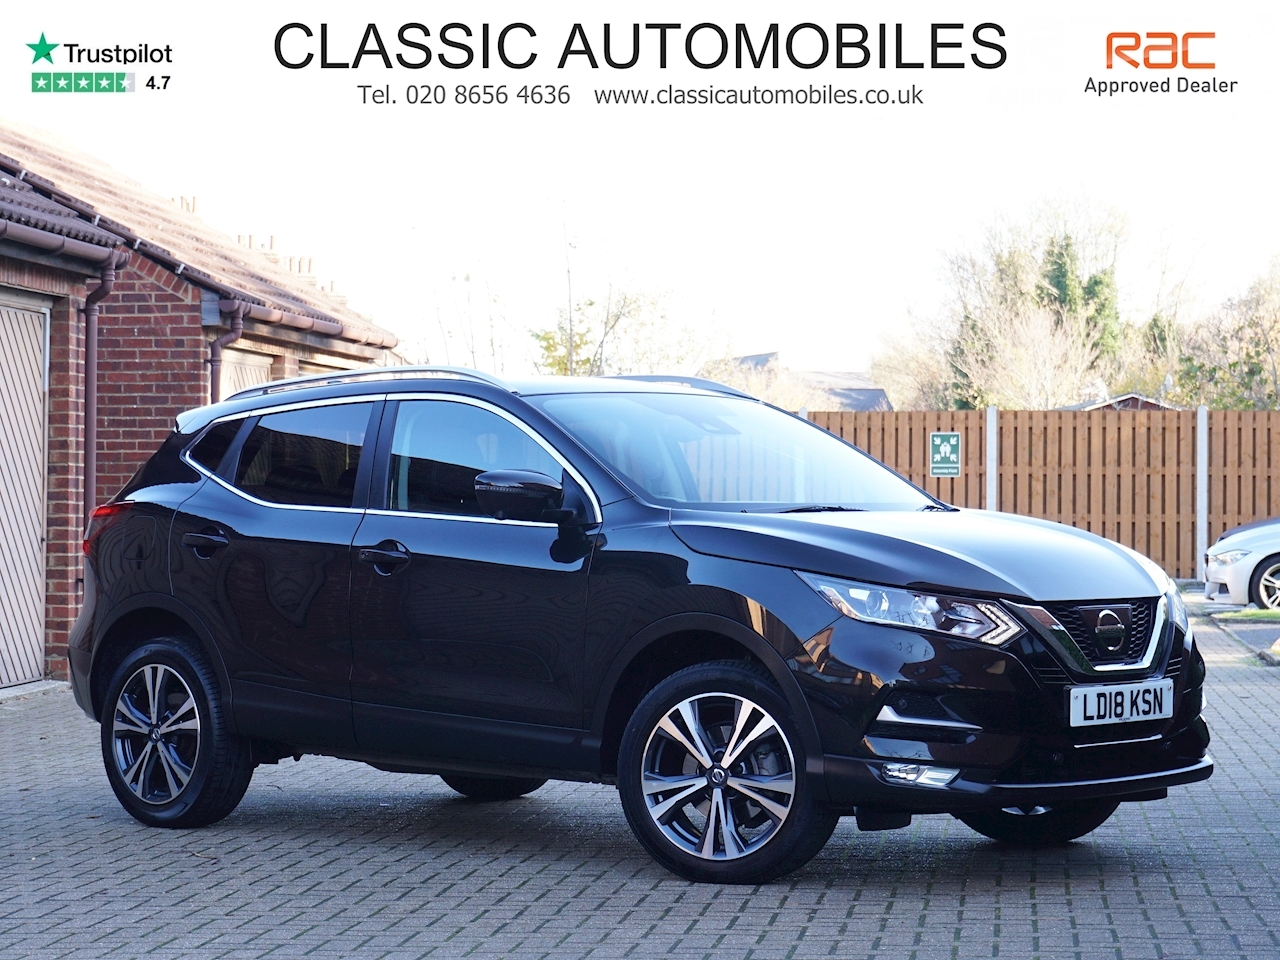 Qashqai 1.5 dCi N-Connecta SUV 5dr Diesel Manual (s/s) (110 ps)